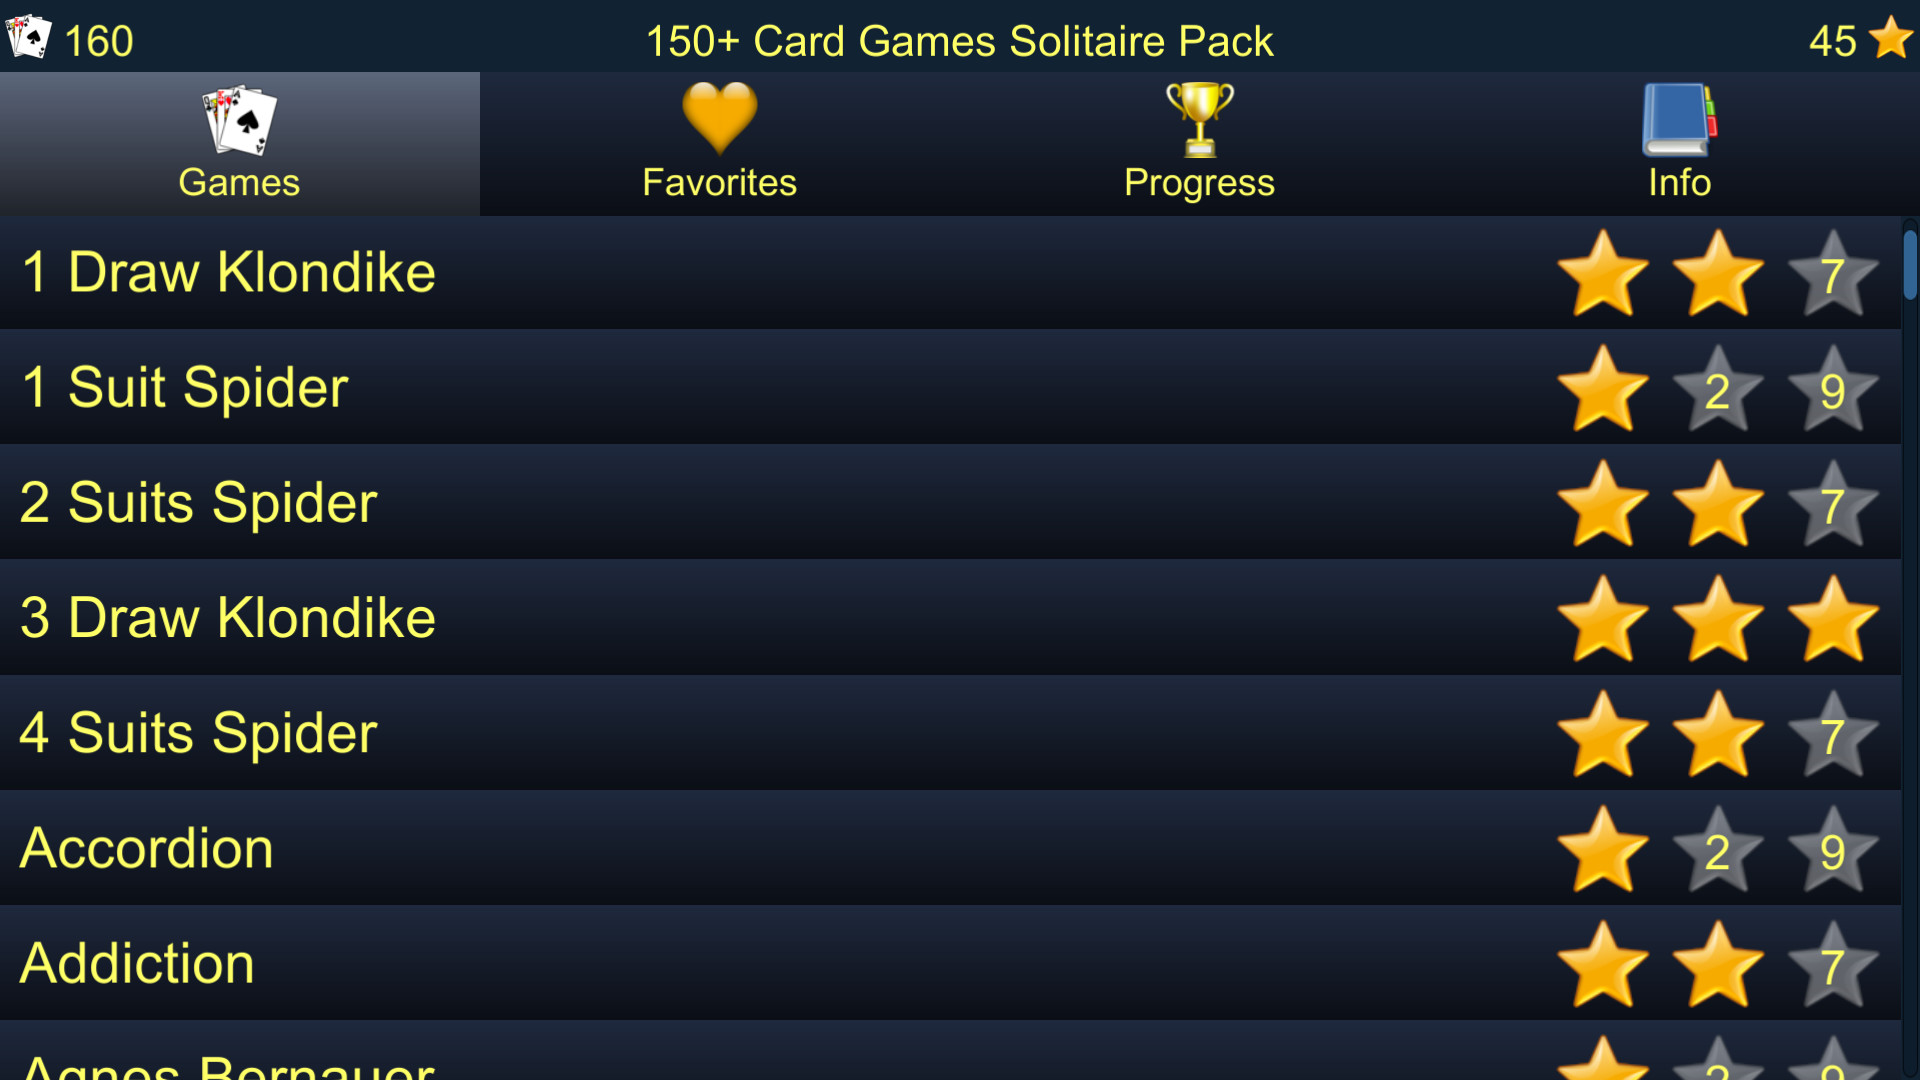 150+ Card Games Solitaire Pack Steam CD Key [$ 0.63]